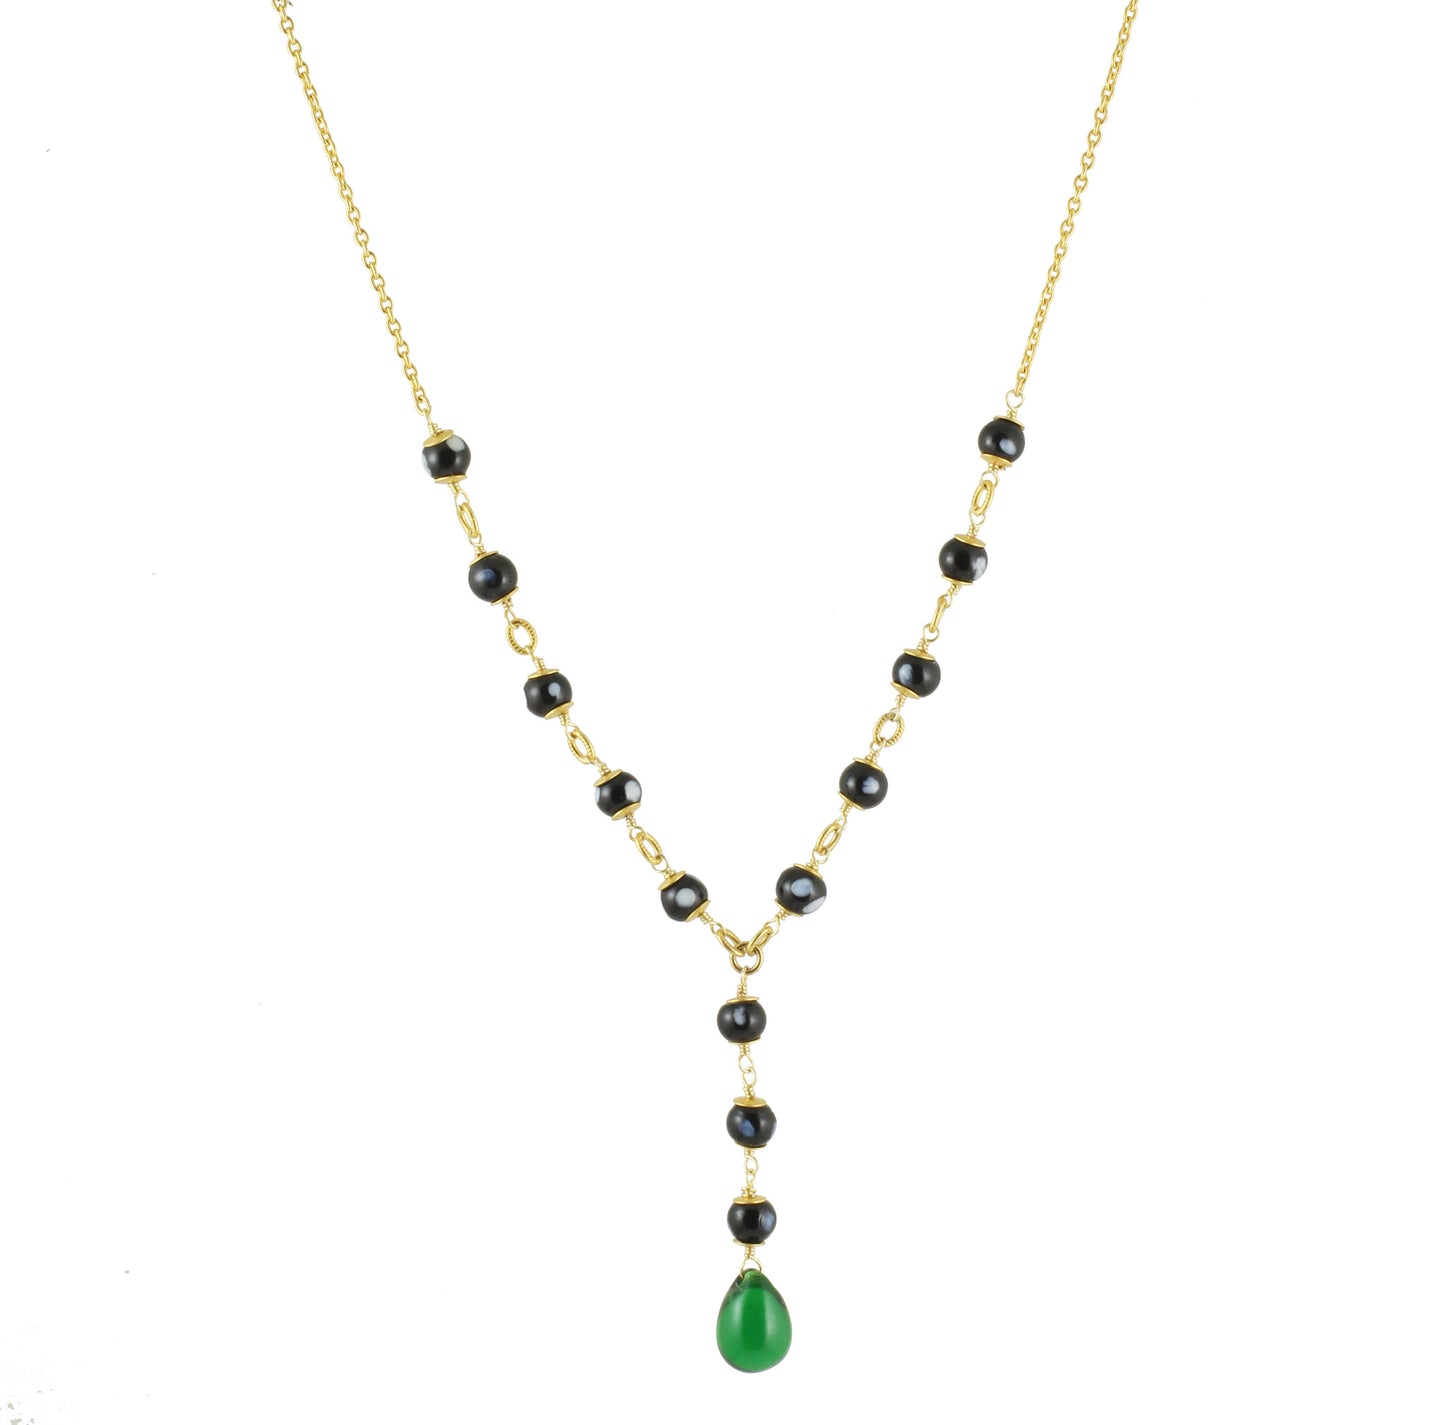 Kriola Necklace | Beaded Necklace with Jade Crystal Pendant